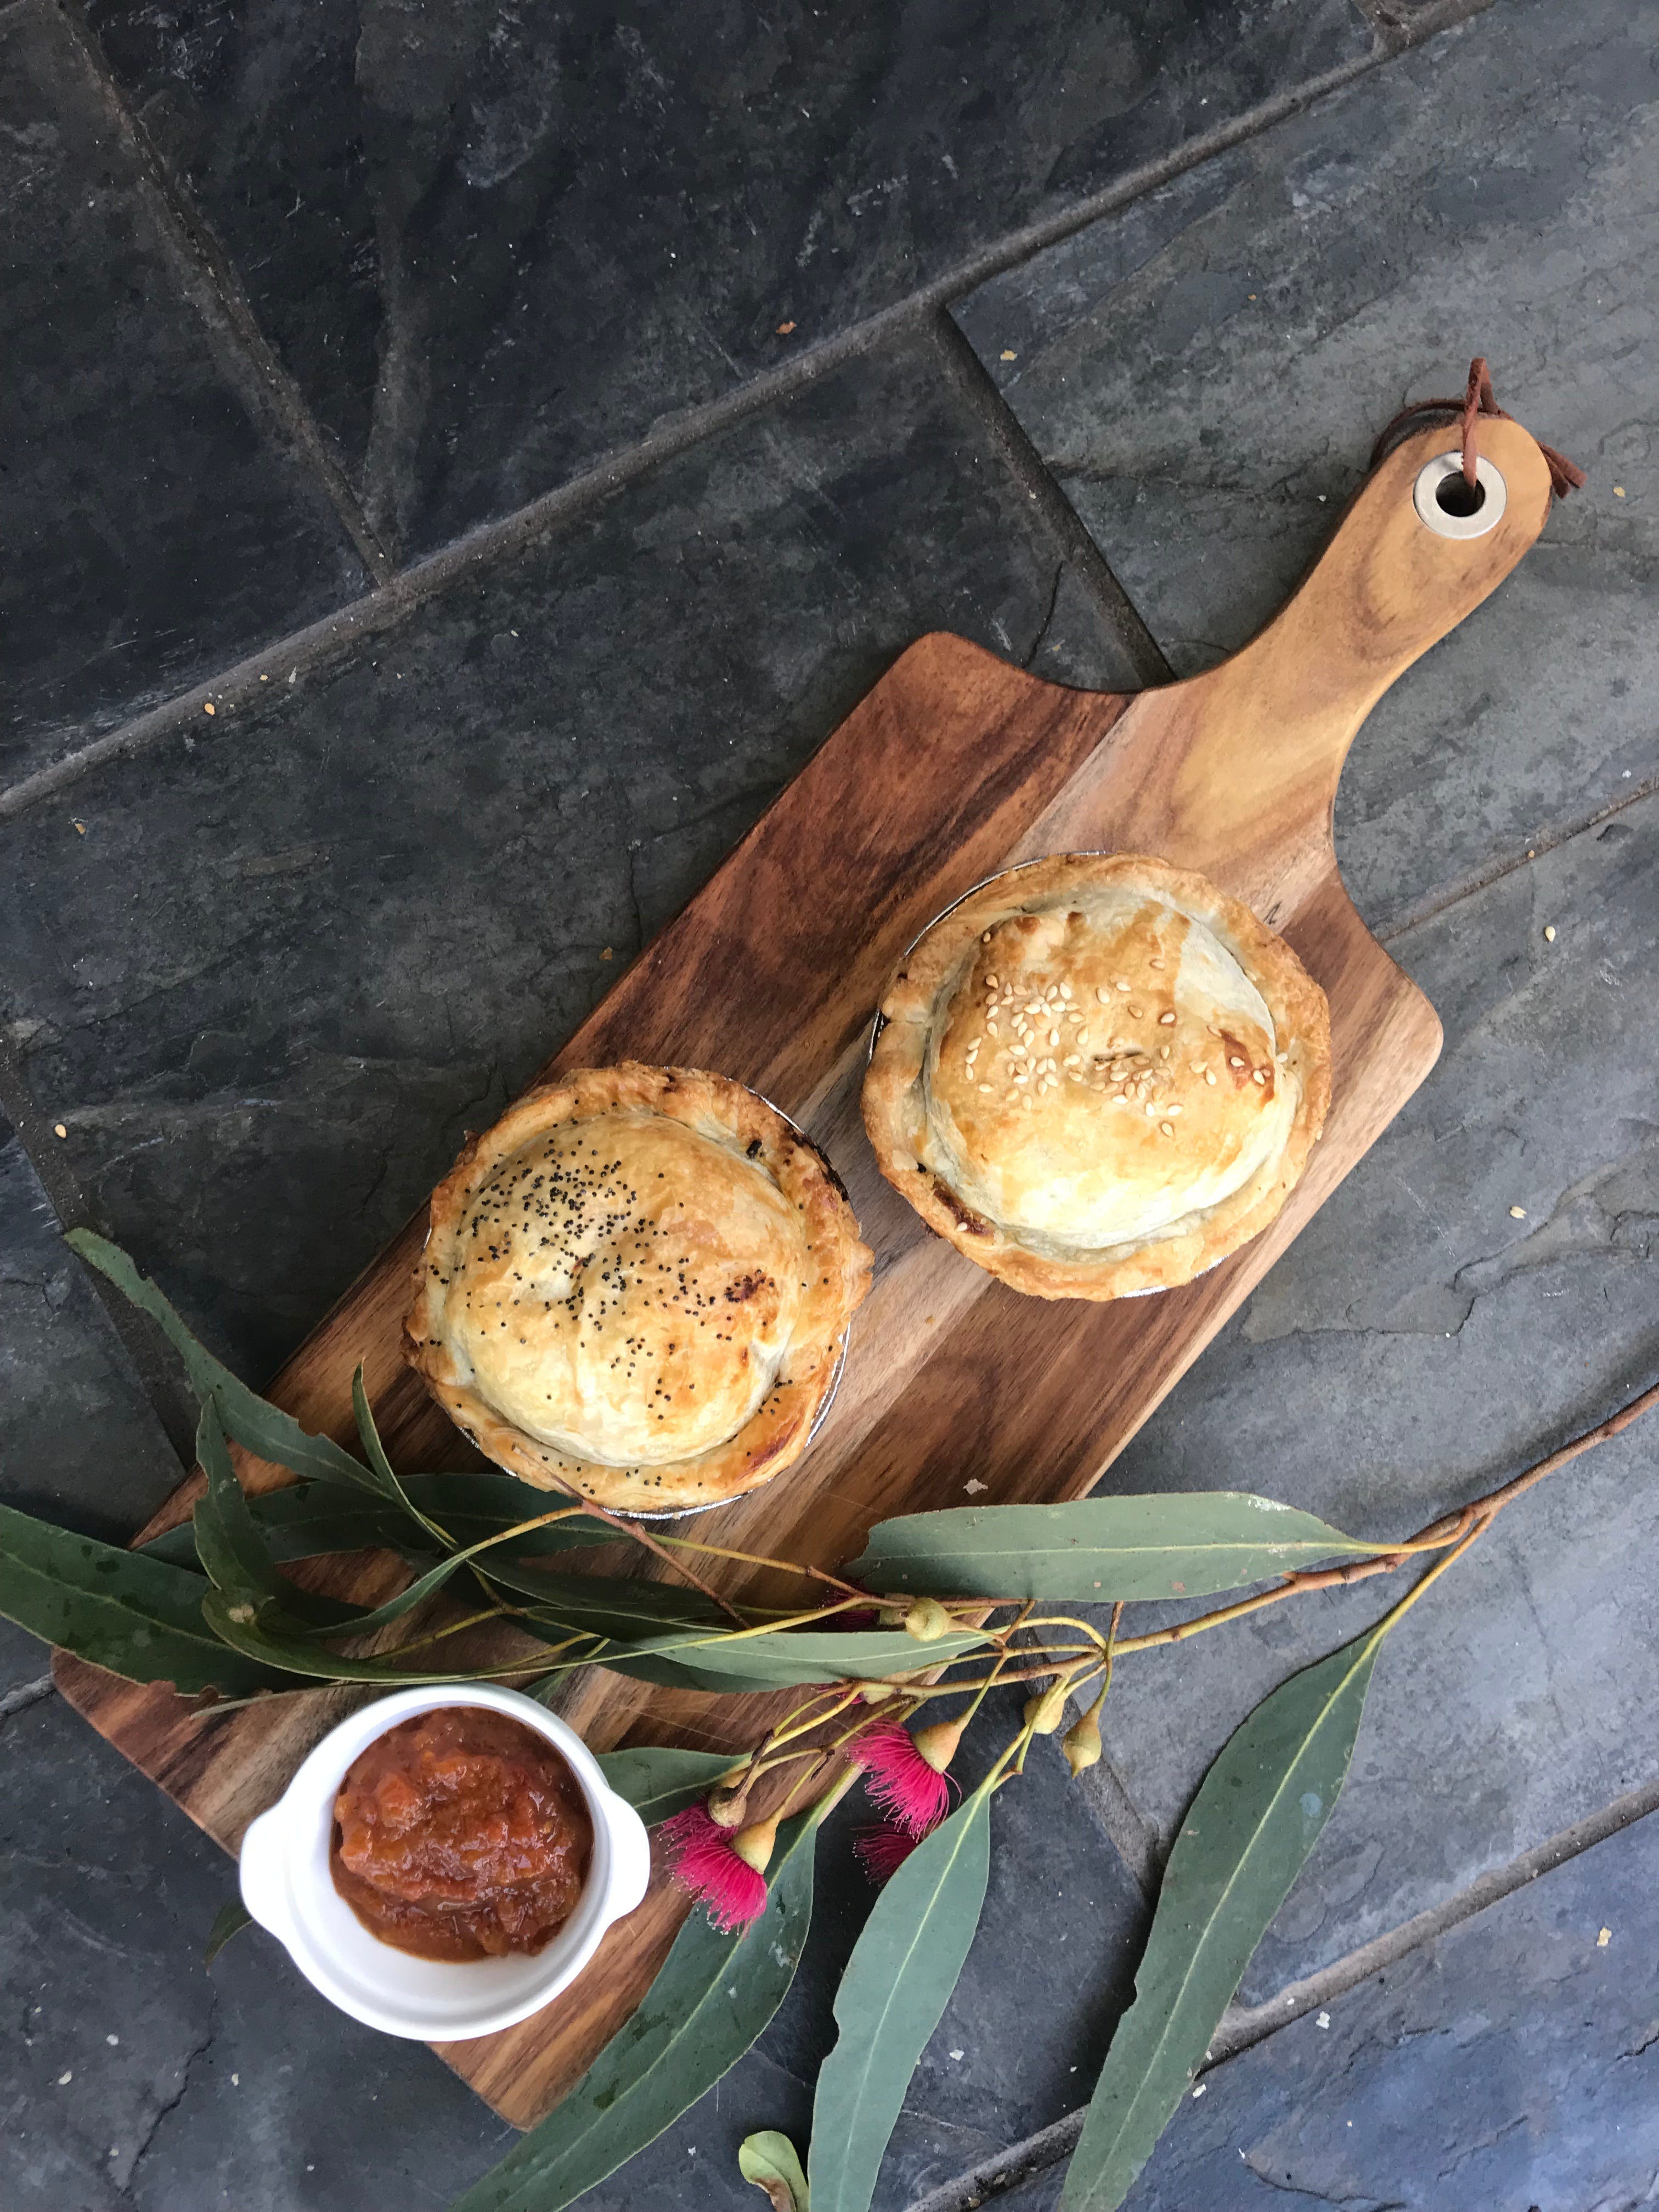 Aged Wine and Vintage Pies - Accommodation Airlie Beach